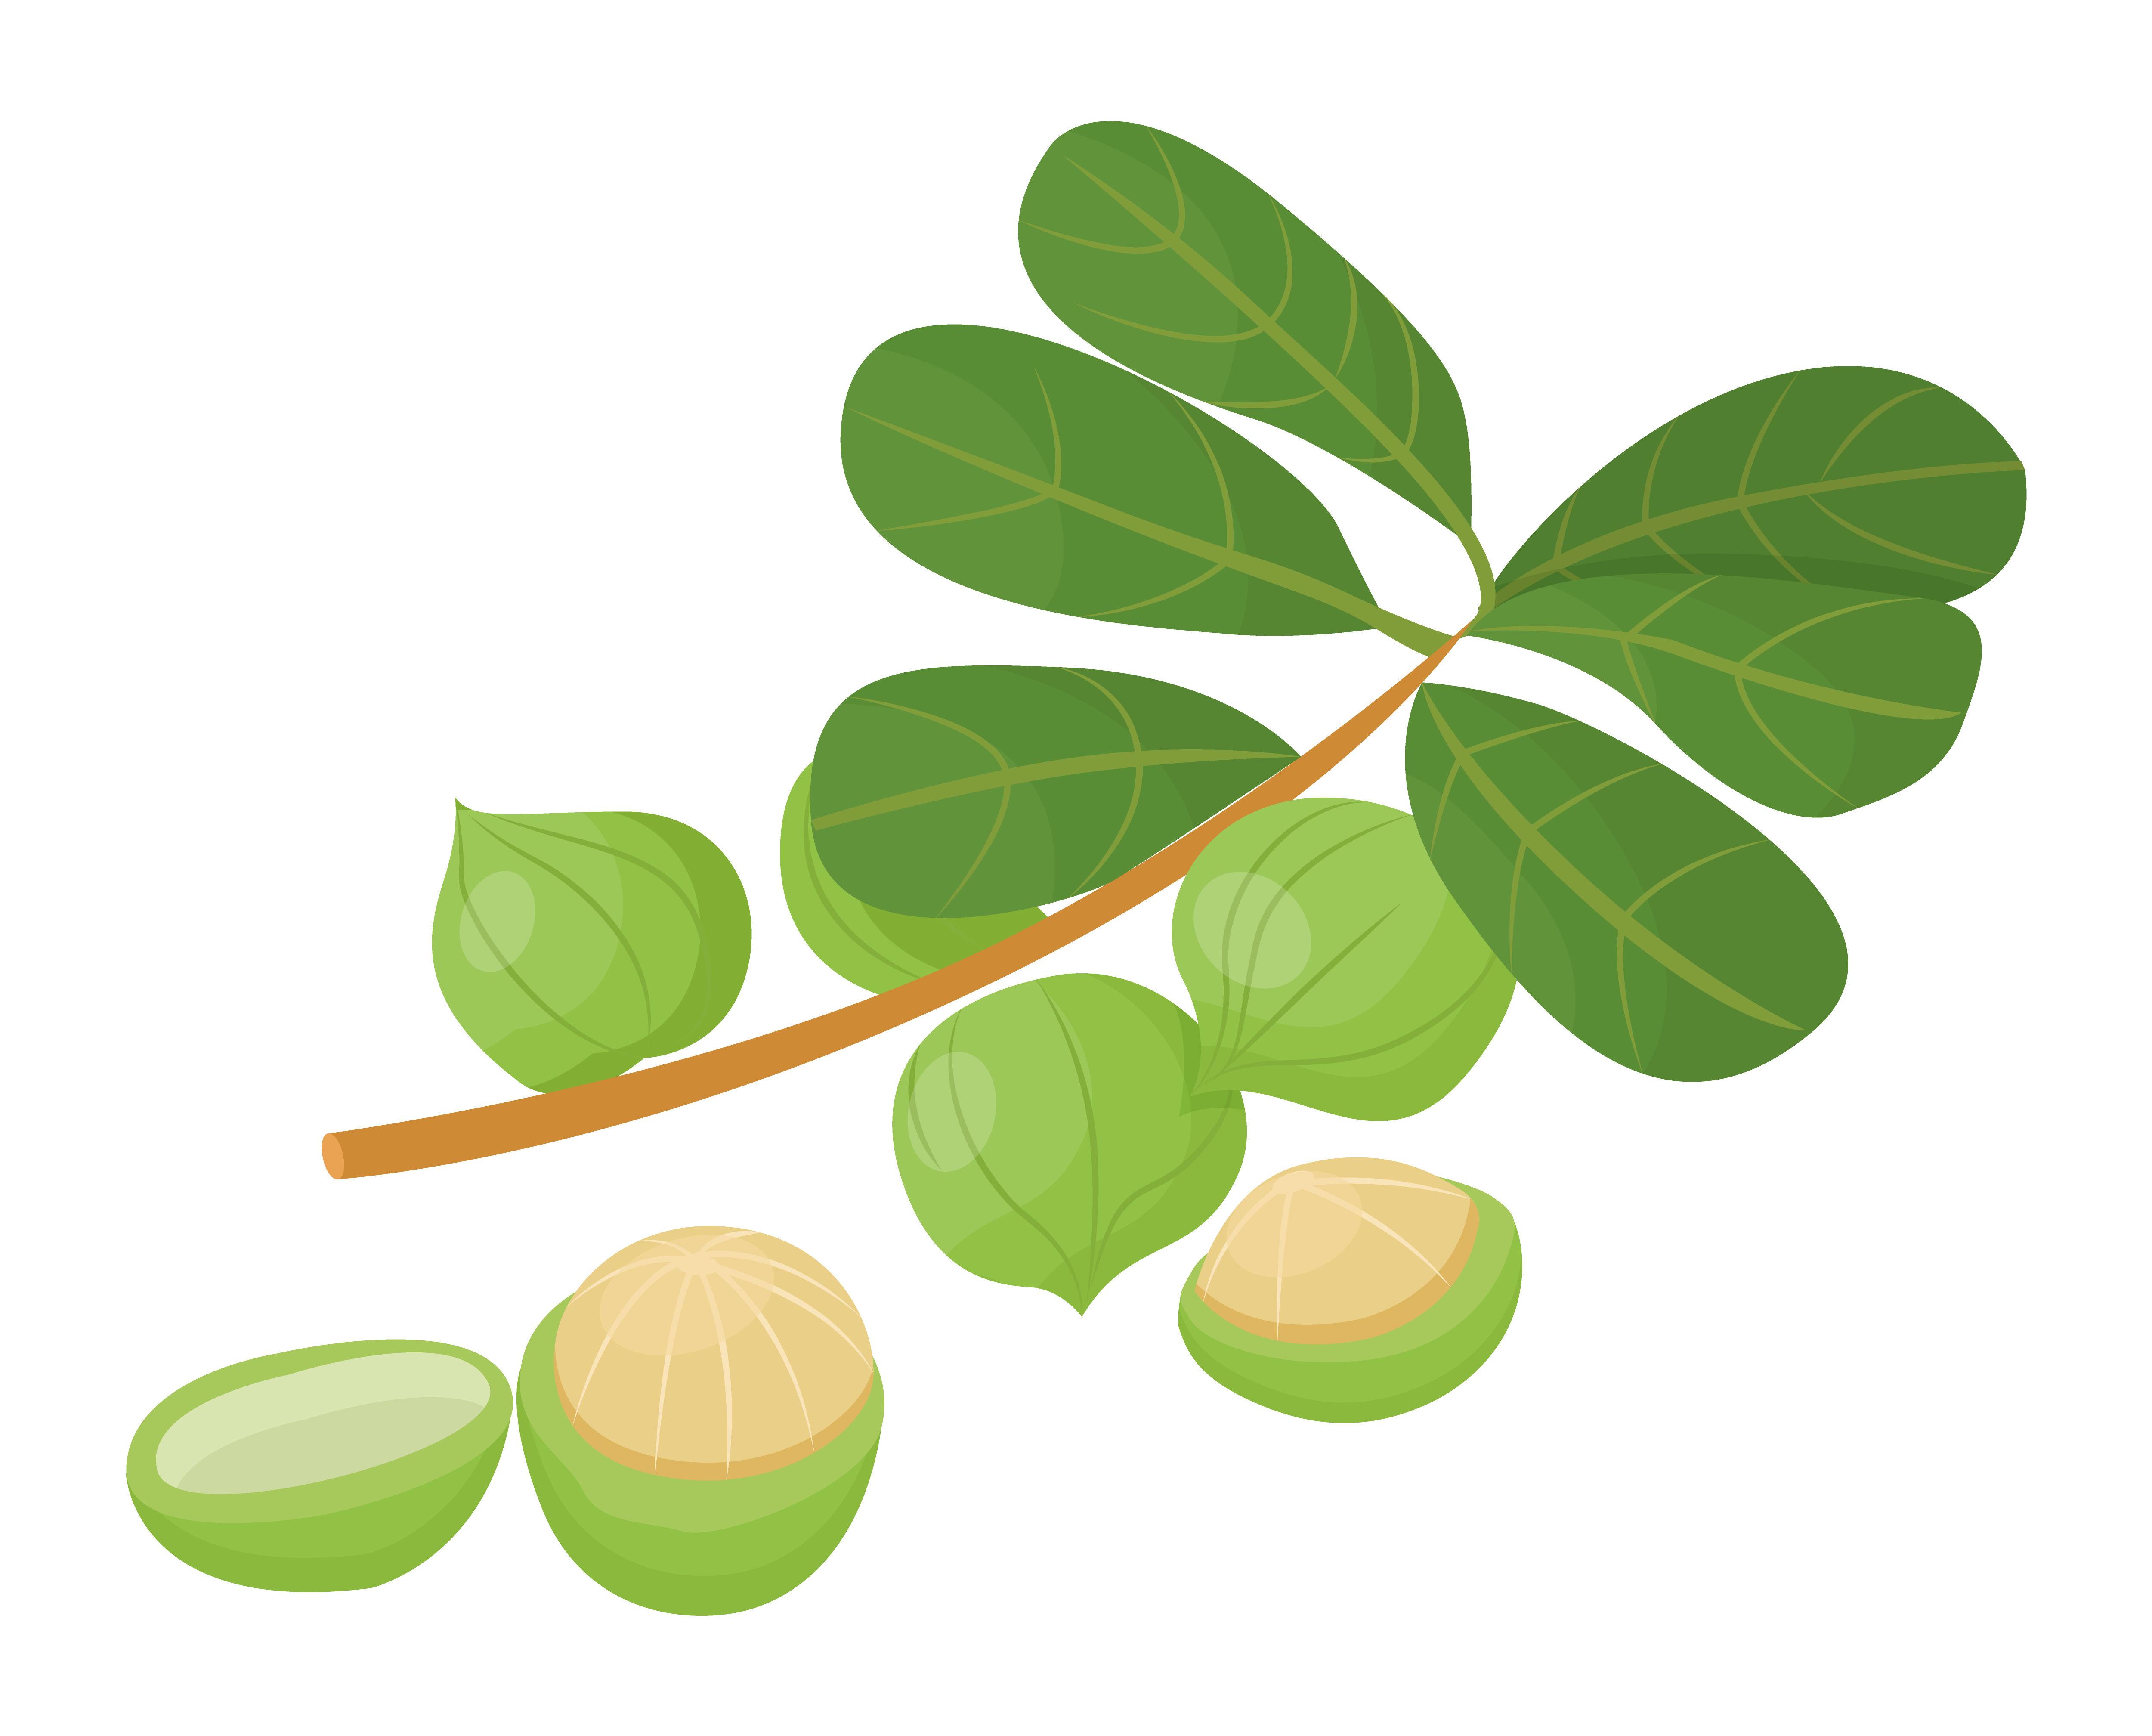 Branch with green leaves and maroochi nut. Macadamia nuts isolated on white background. Small core inside nutshell. Raw used in culinary and hair care, cosmetics as oil. Vector illustration in flat. Branch with Leaves and Macadamia or Maroochi Nuts